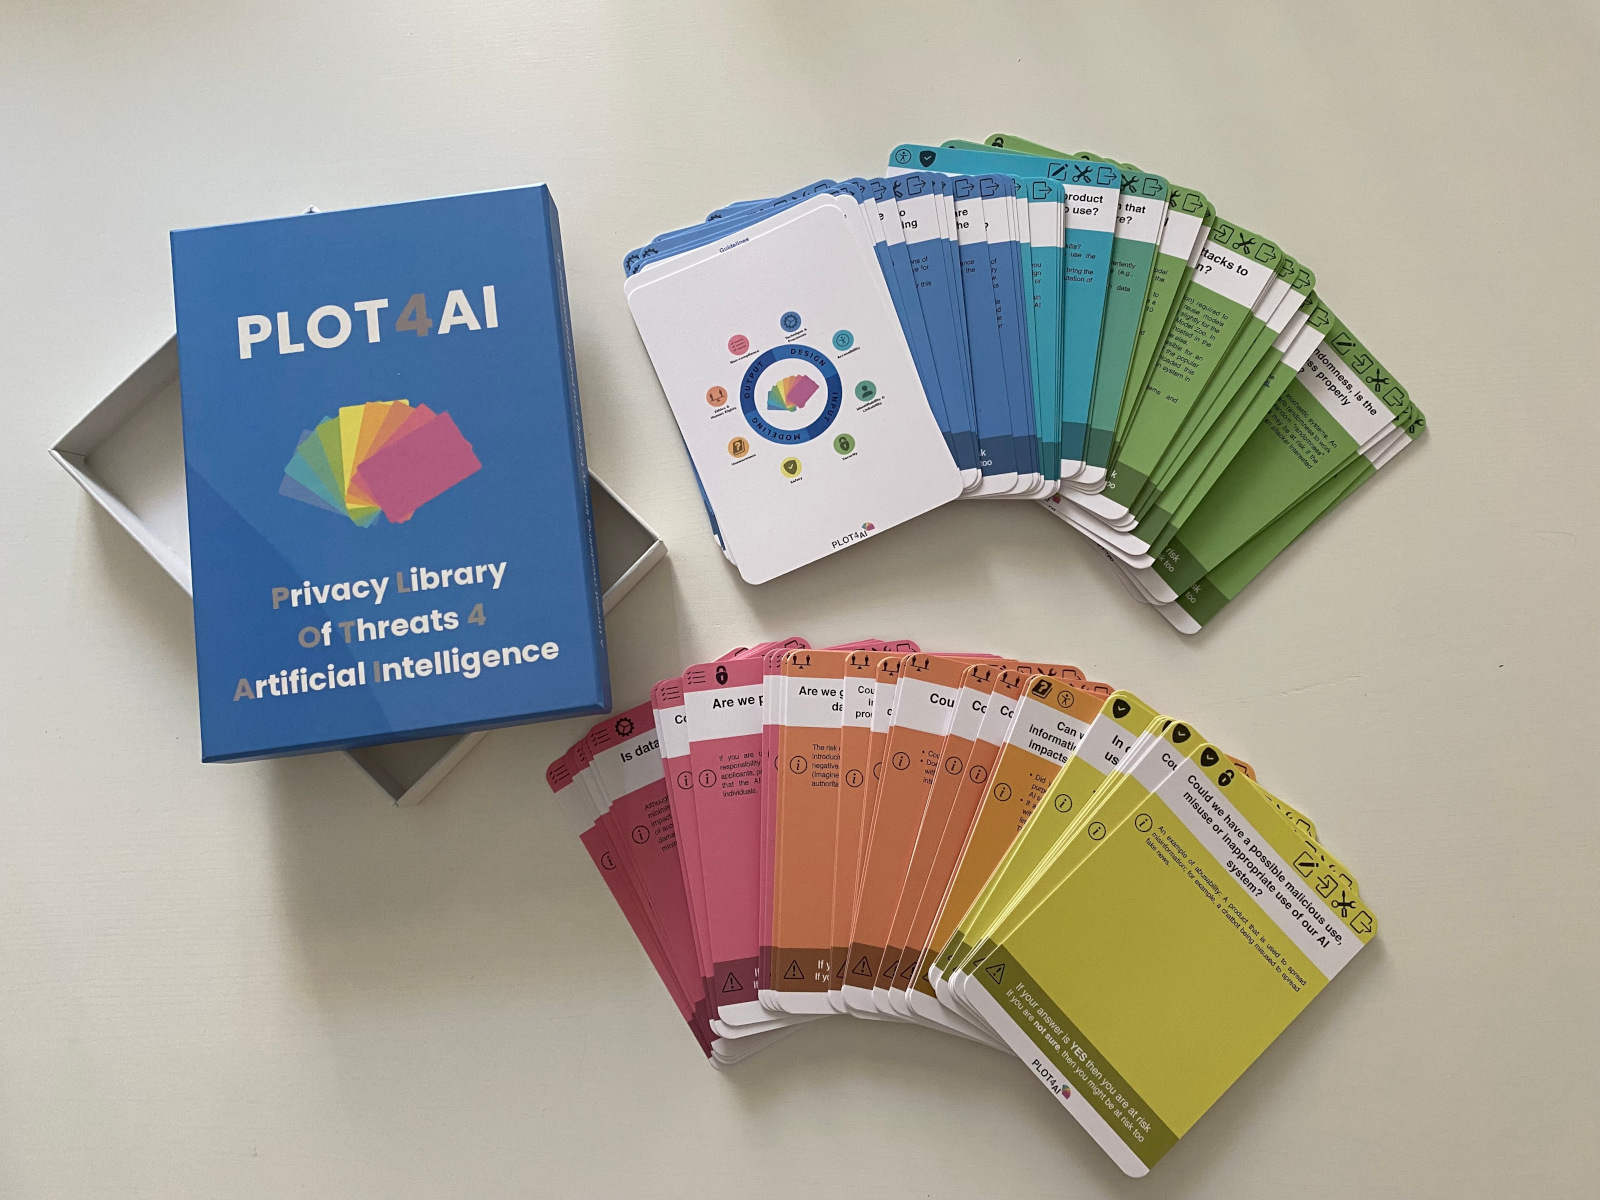 plot4ai card game displayed on a table